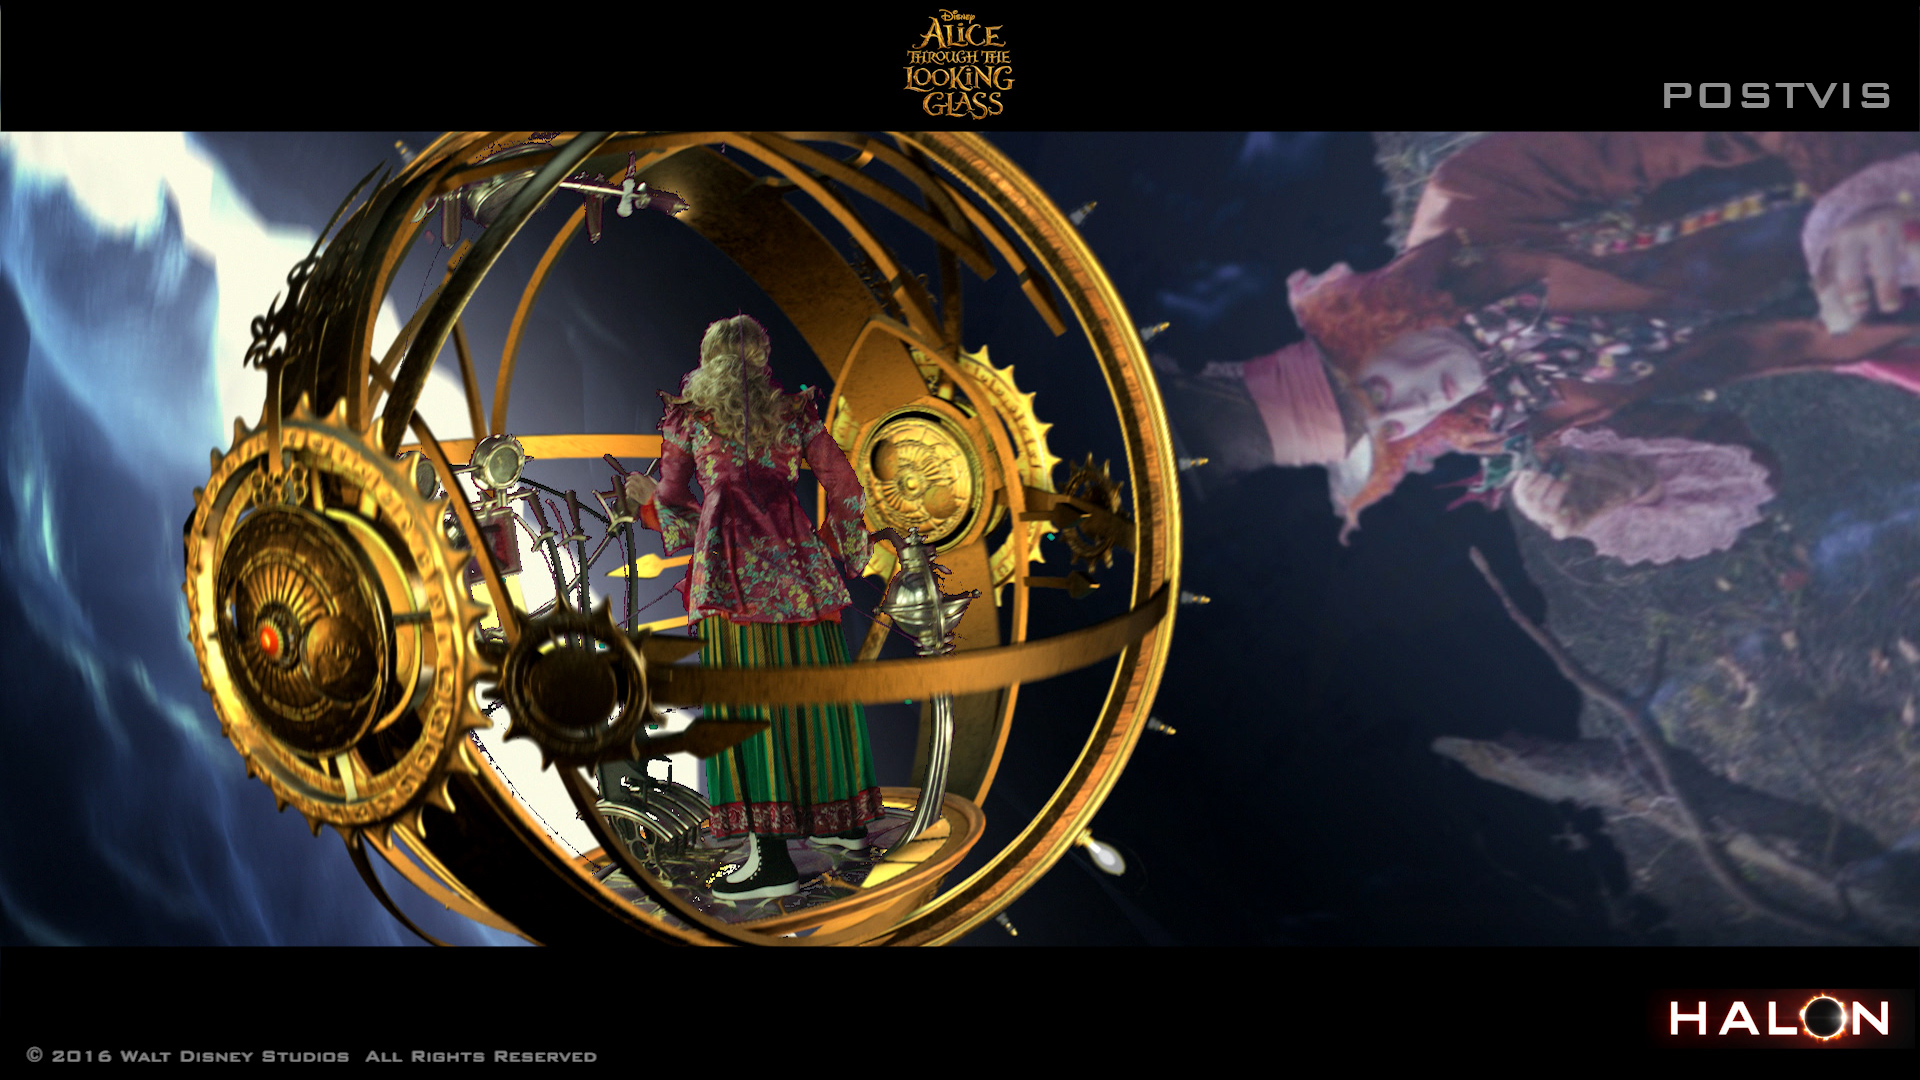 Alice Through The Looking Glass Using Previs And Postvis In Images, Photos, Reviews